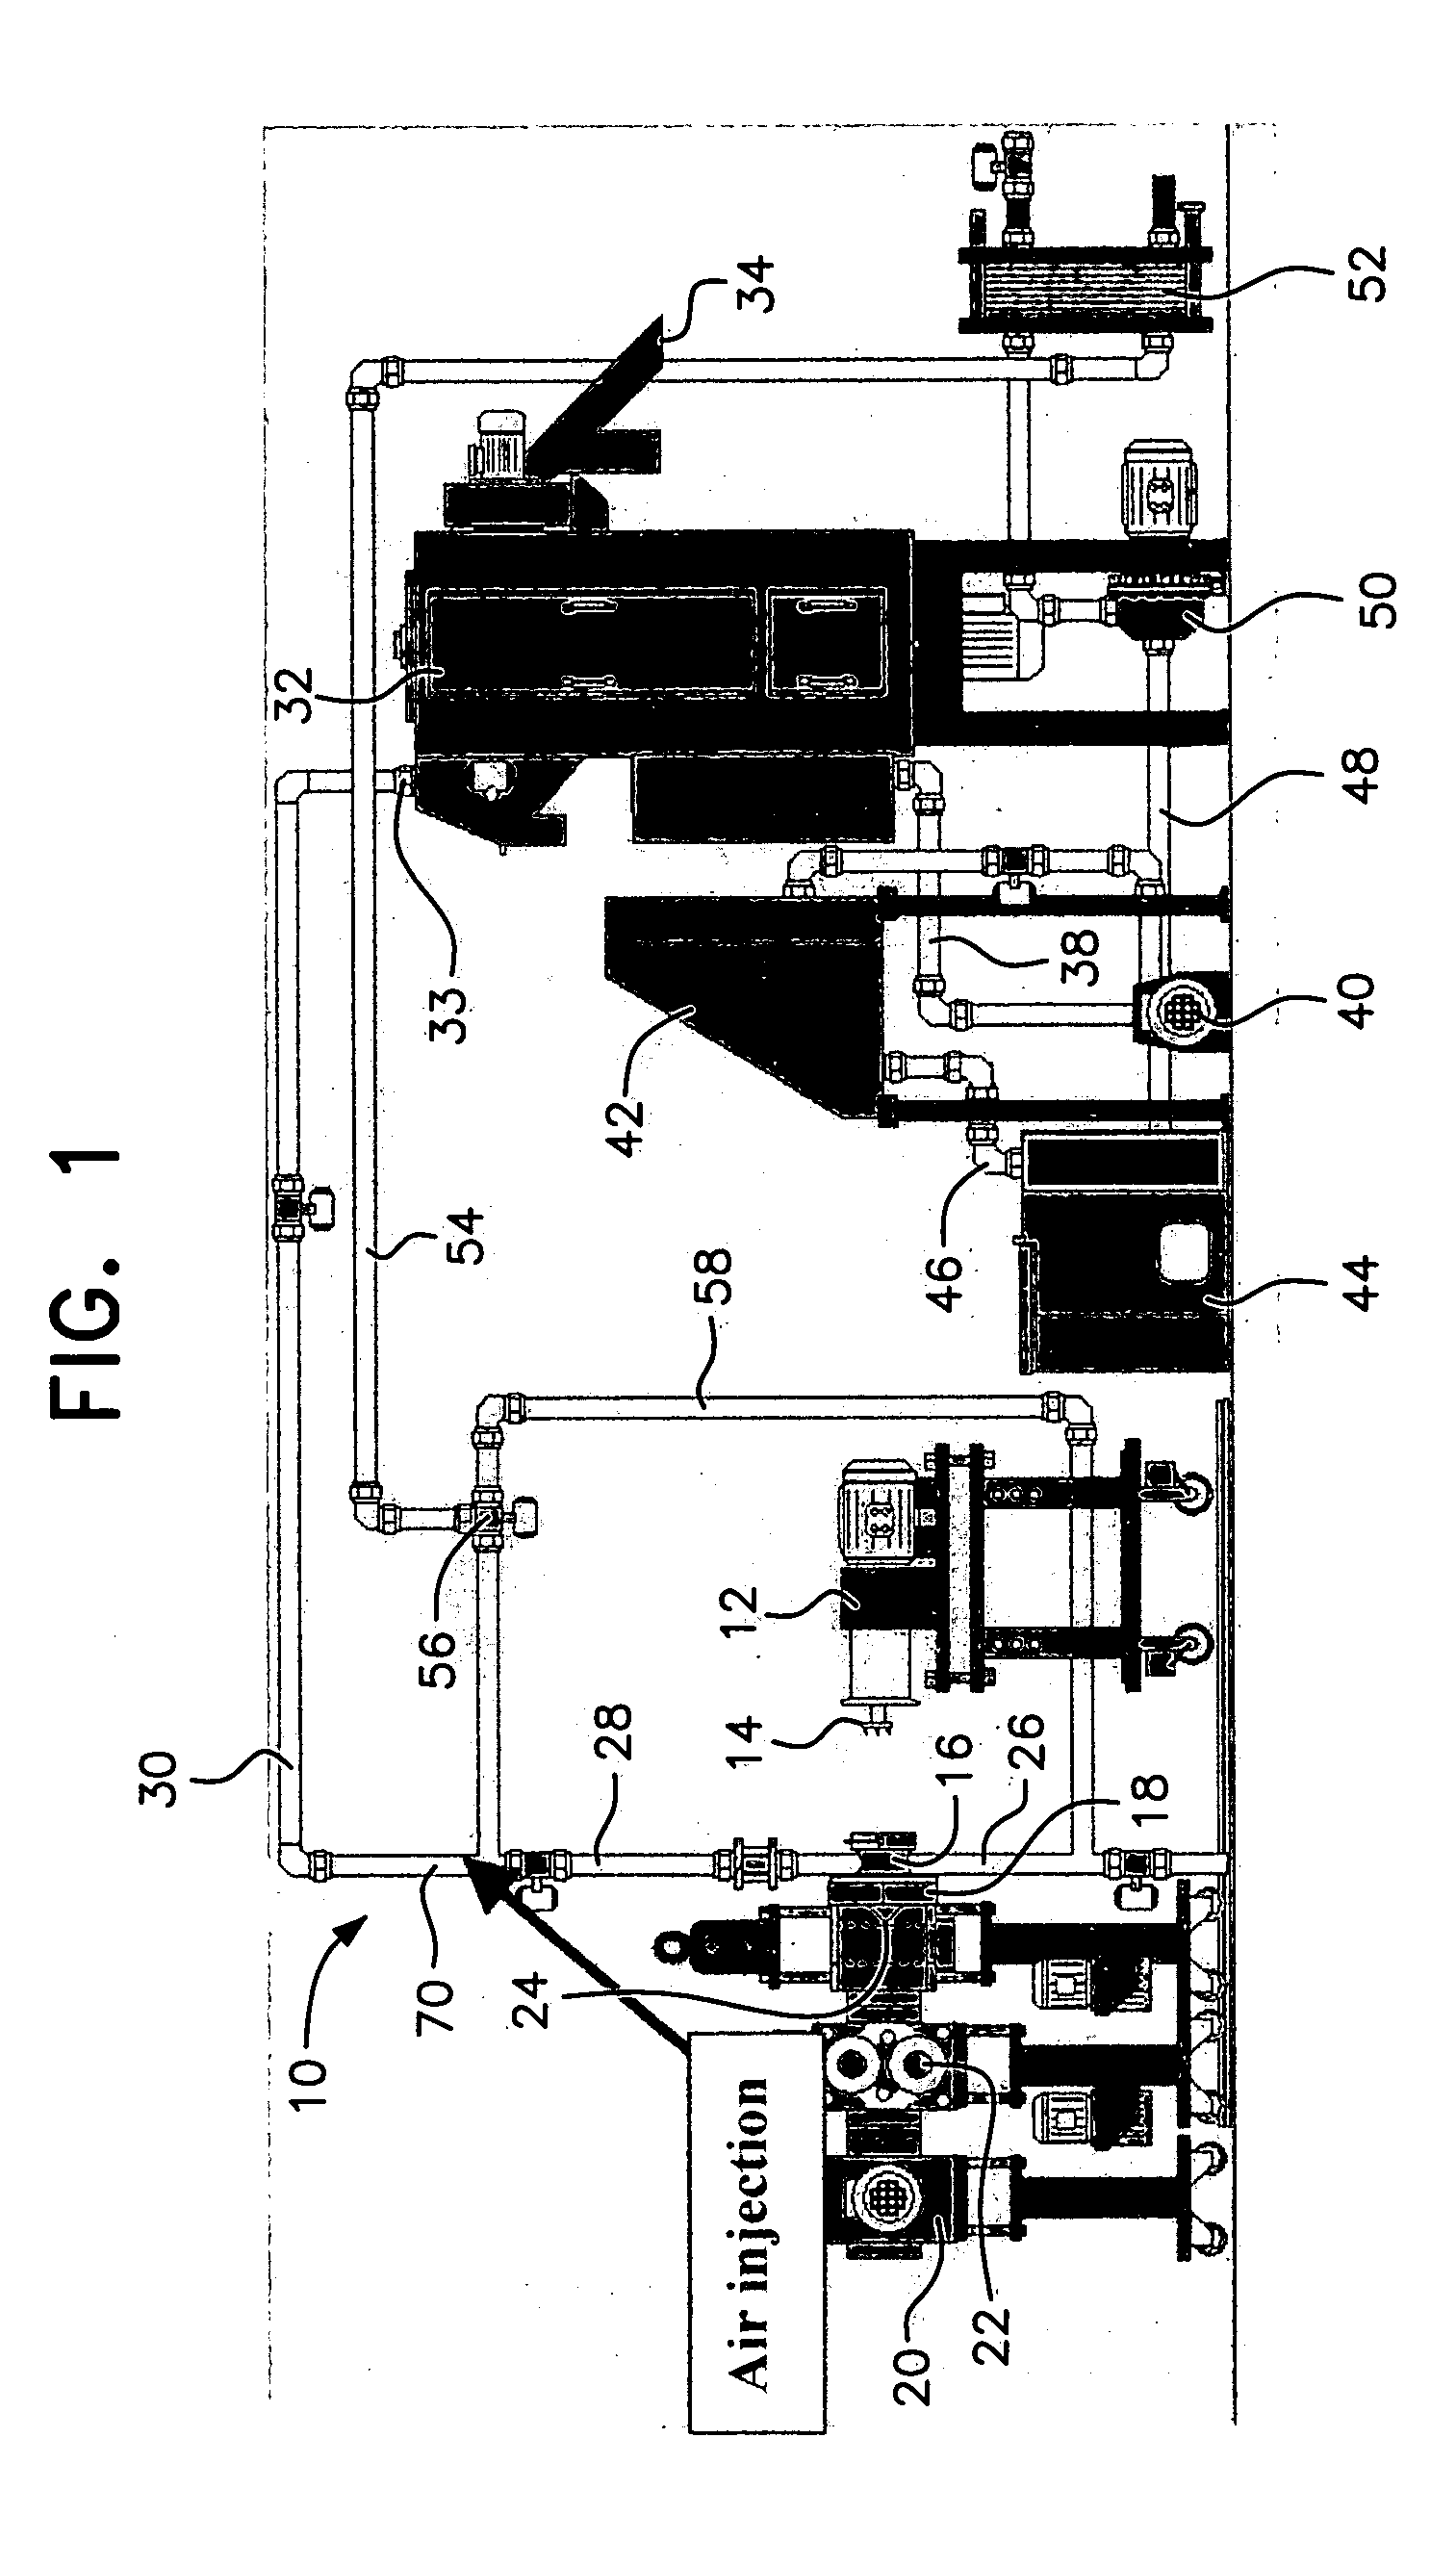 Method and apparatus for making crystalline PET pellets